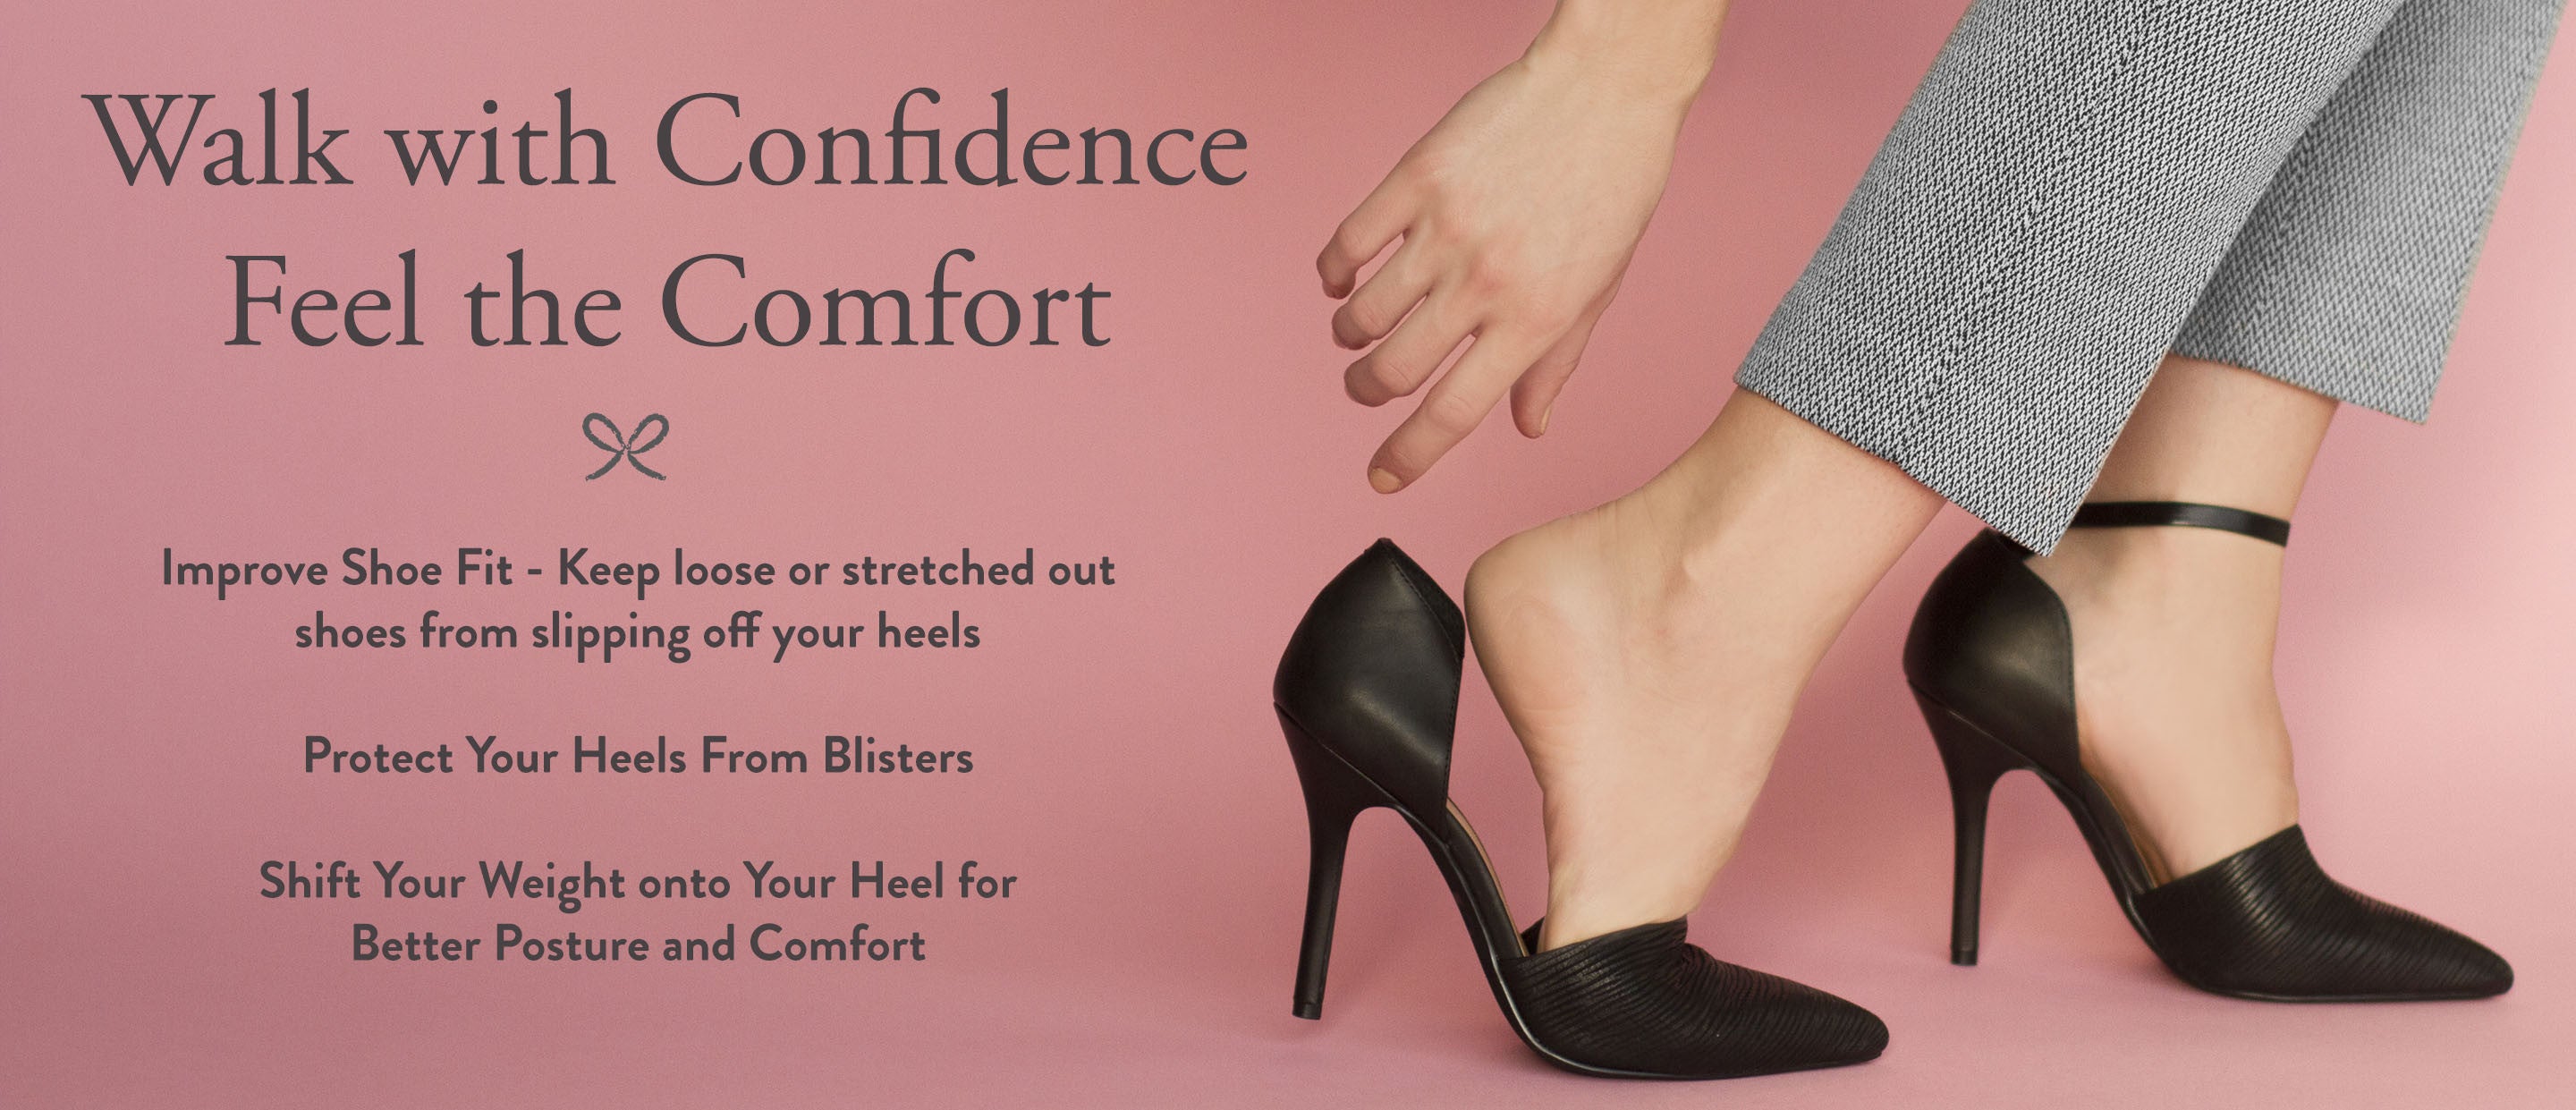 Attachable ankle straps Improve Shoe Fit - Keep loose or stretched out shoes from slipping off your heels  Protect Your Heels From Blisters, Shift Your Weight onto Your Heel for Better Posture and Comfort